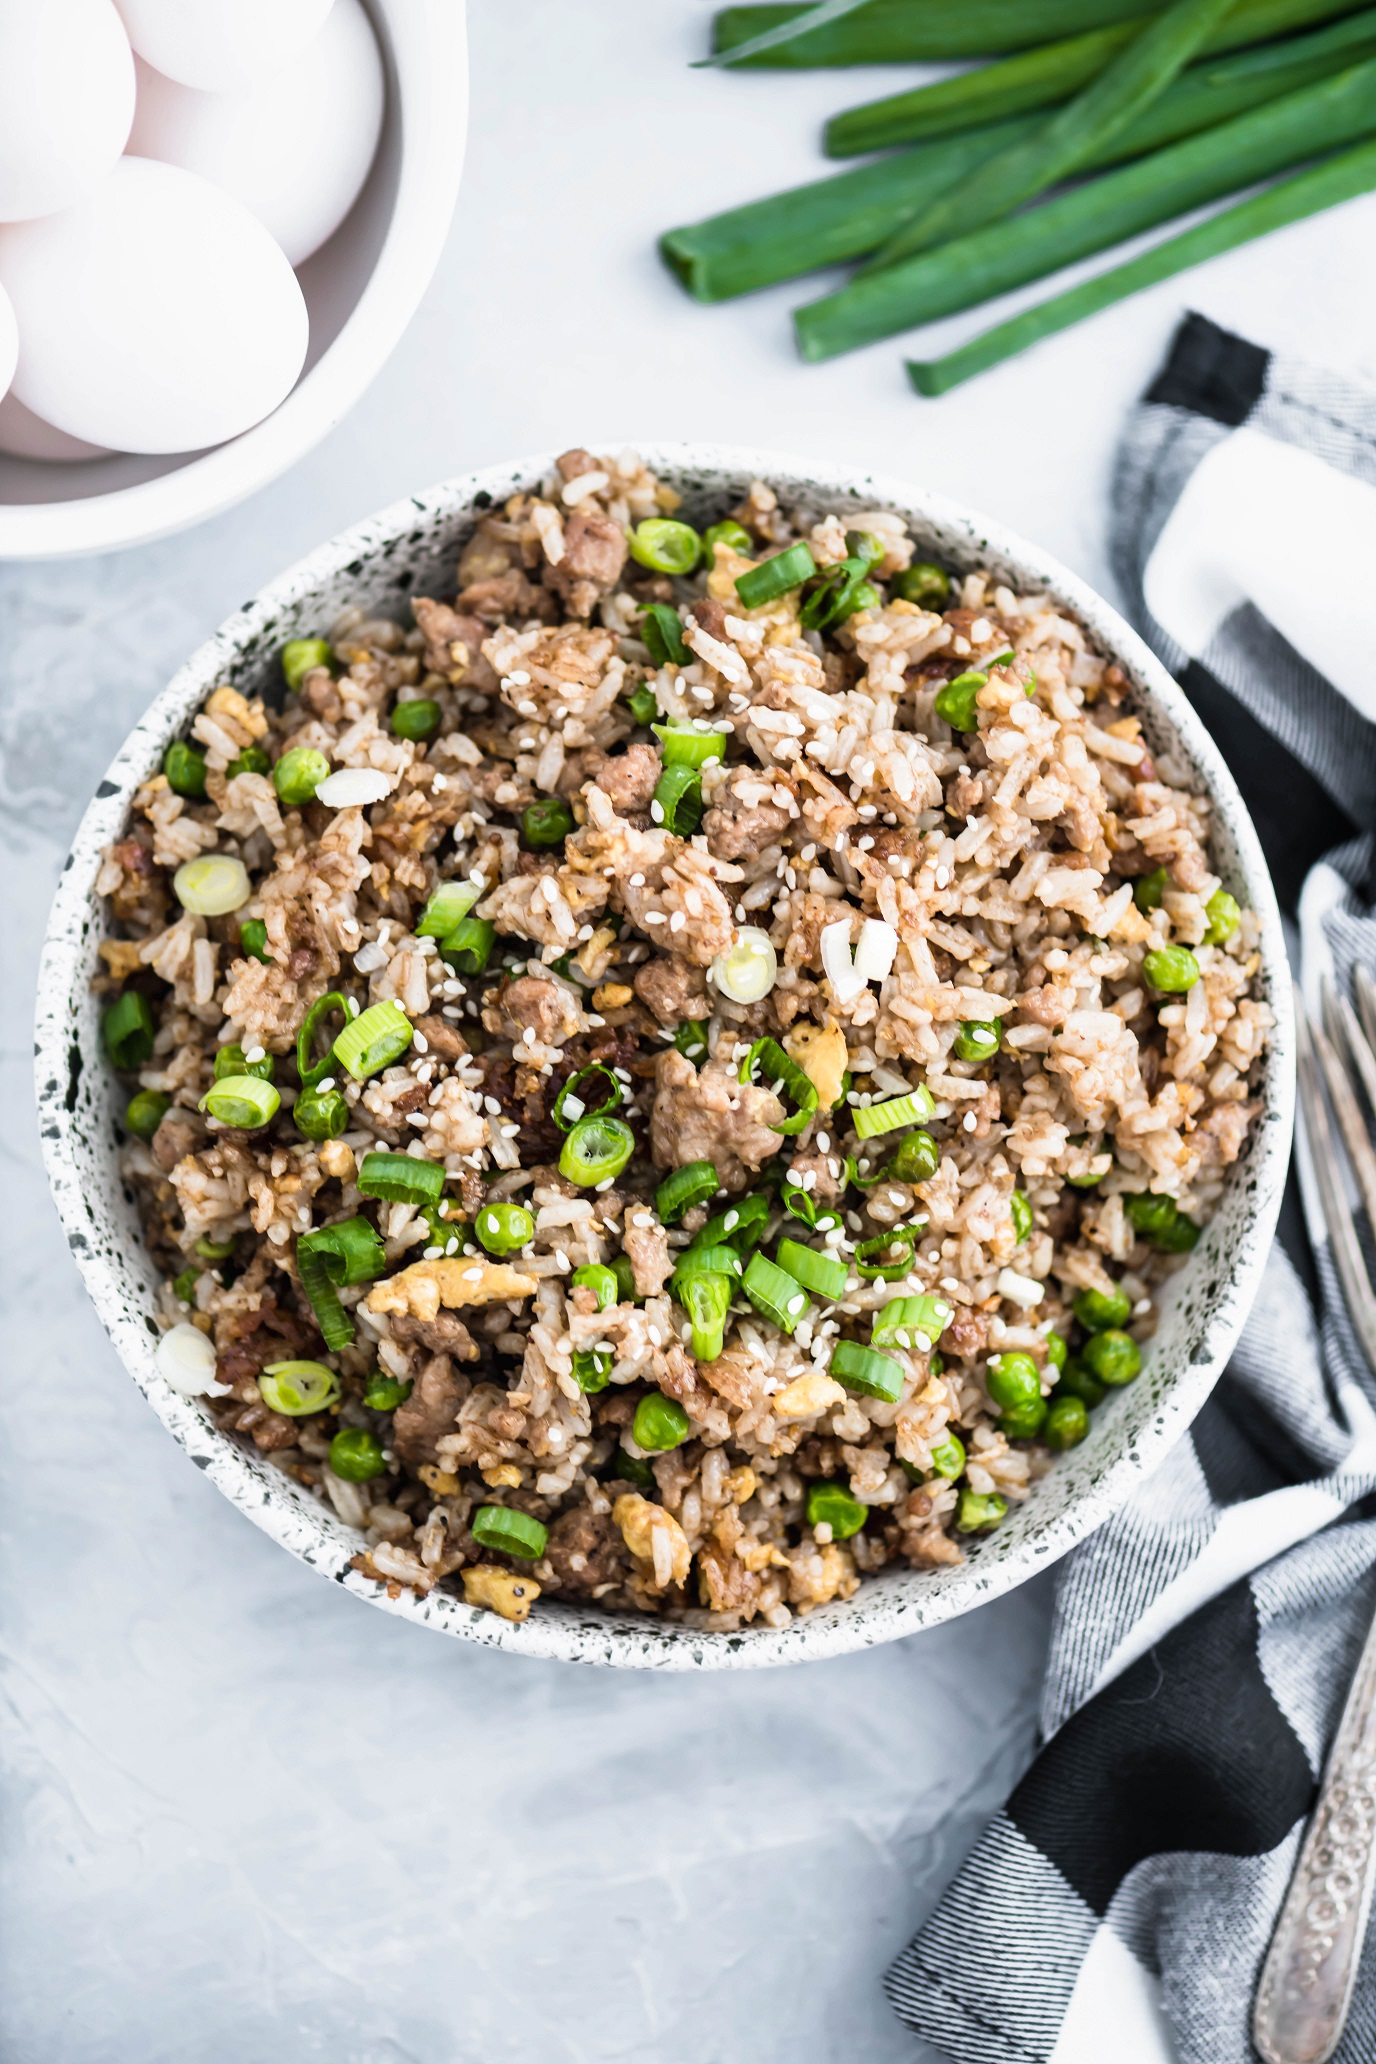 This Chinese takeout inspired Ground Pork Fried Rice is super fast to throw together for lunch or dinner. A great use of leftover rice.